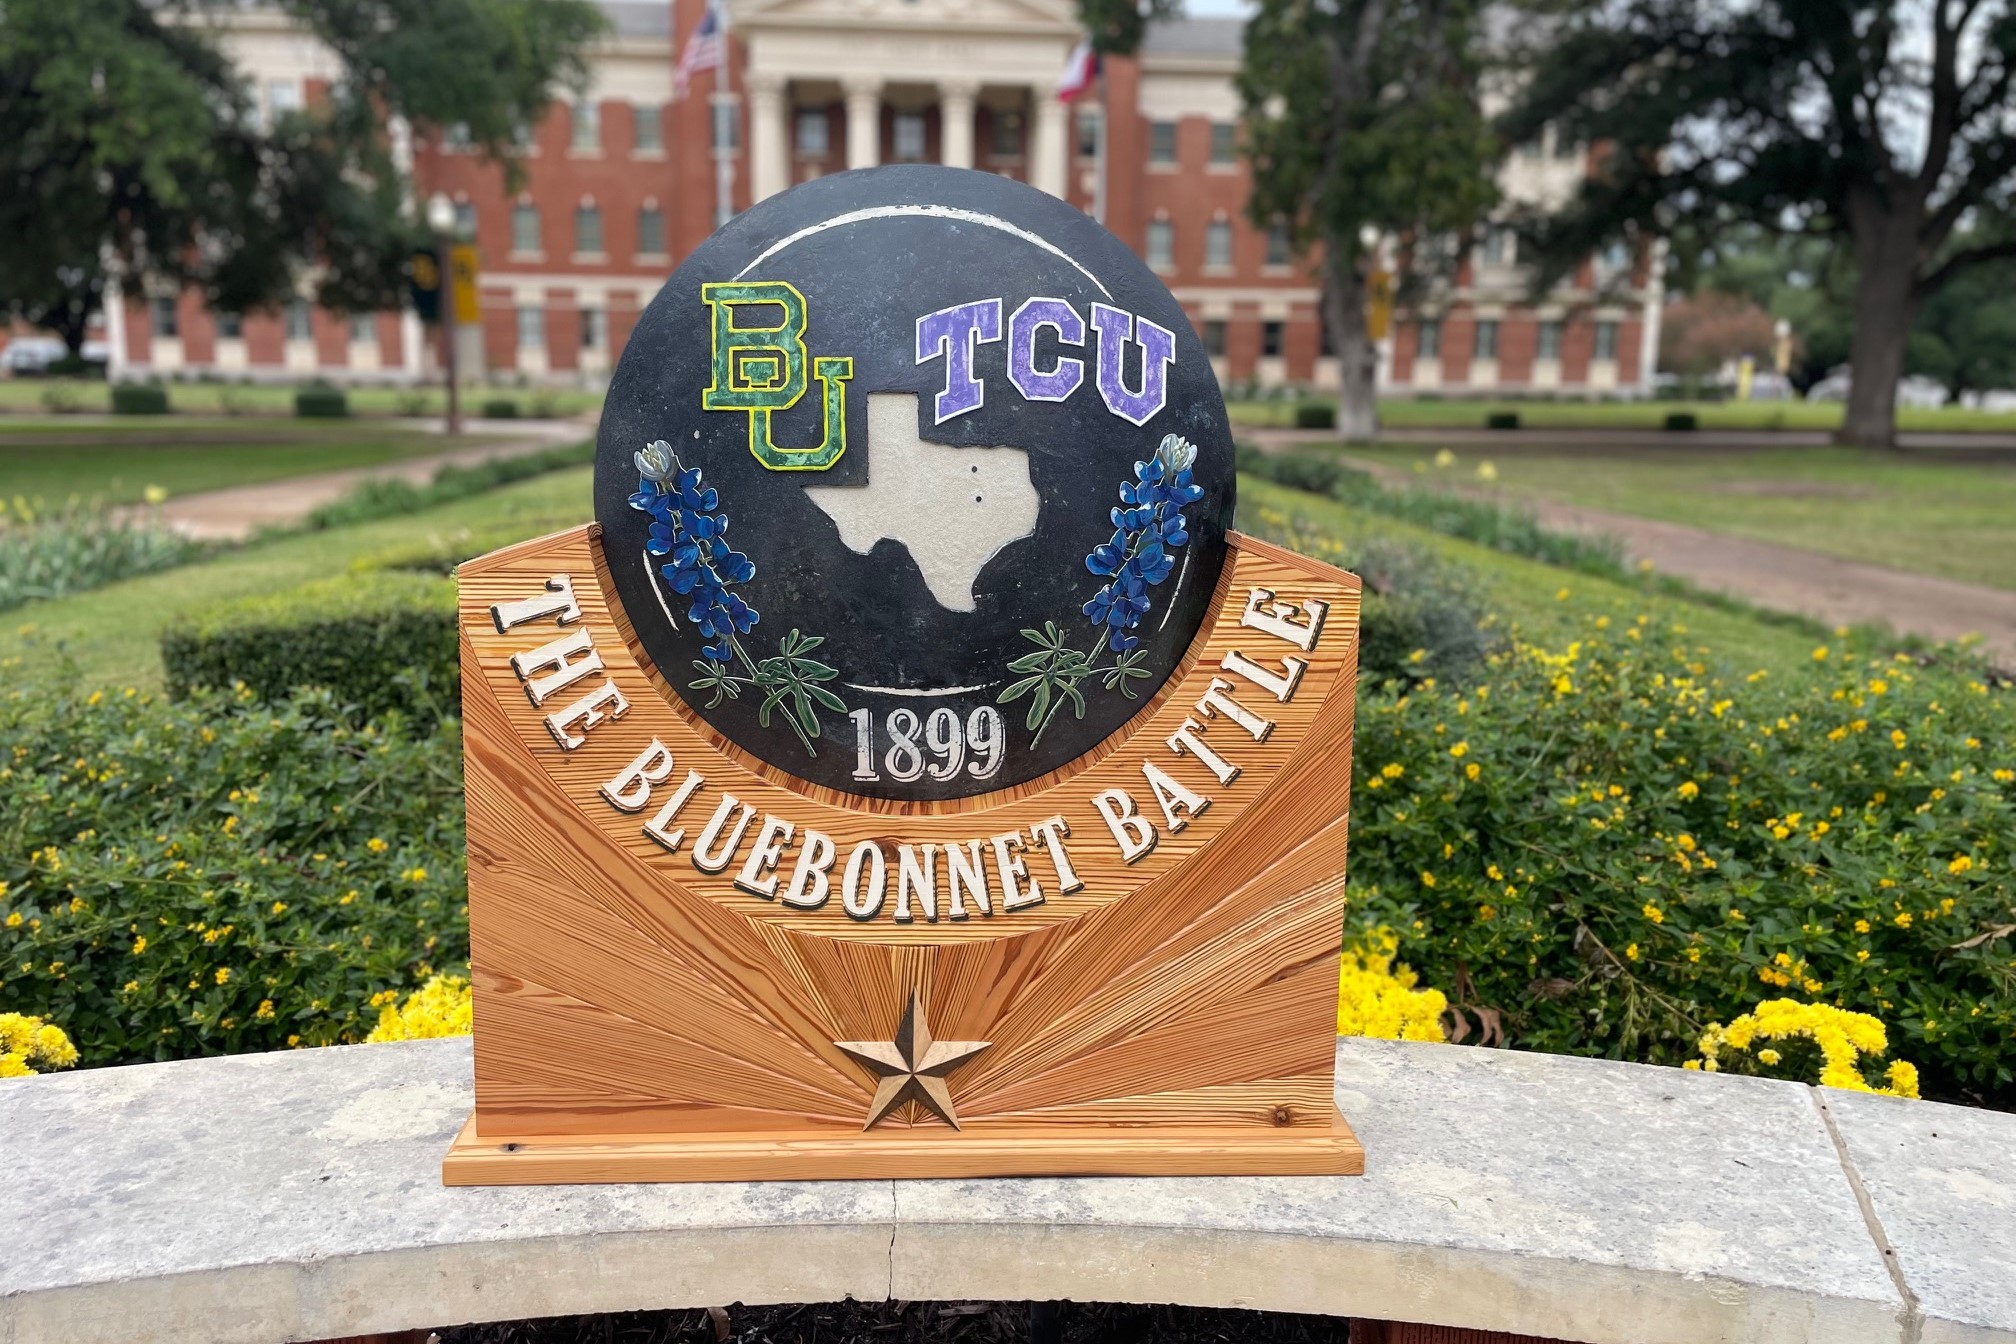 Bluebonnet Bowl trophy, a shield with BU, TCU, the state of Texas, bluebonnets and 1899, centered in a wooden stands that says The Bluebonnet Battle